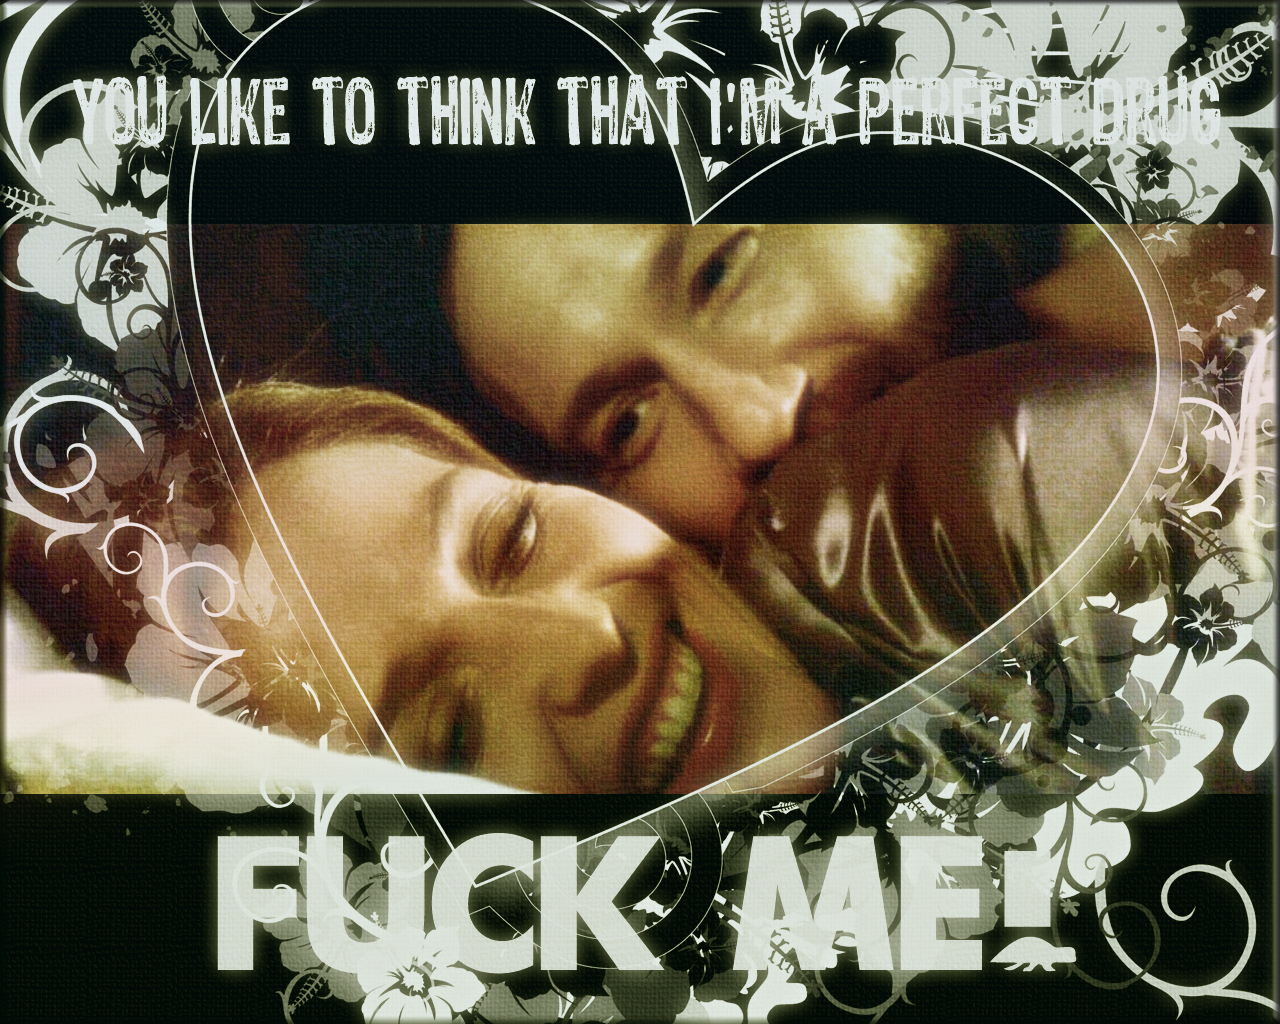 Mulder/scully Iwtb - Gillian Anderson And David Duchovny - HD Wallpaper 